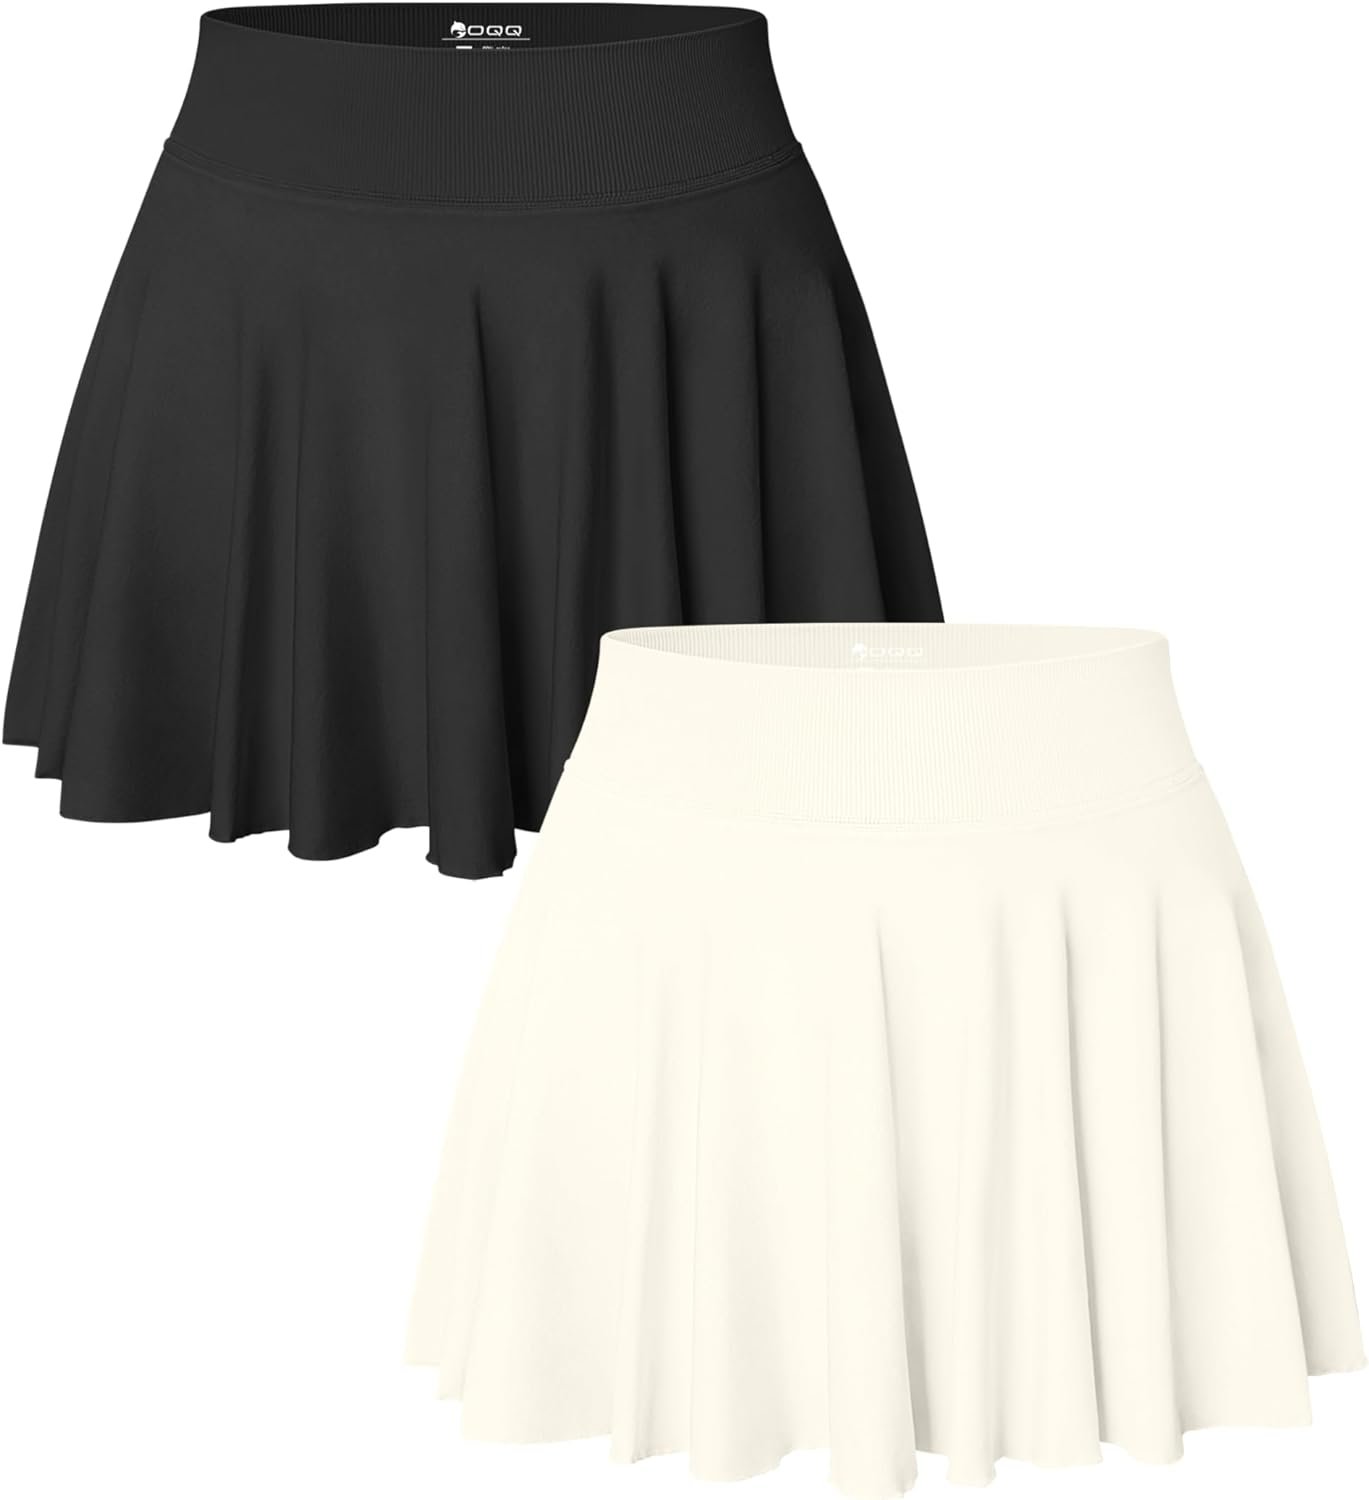 OQQ Women 2 Piece Skirts 2 in 1 Flowy Basic Versatile Stretchy Flared Casual Mini Skirts